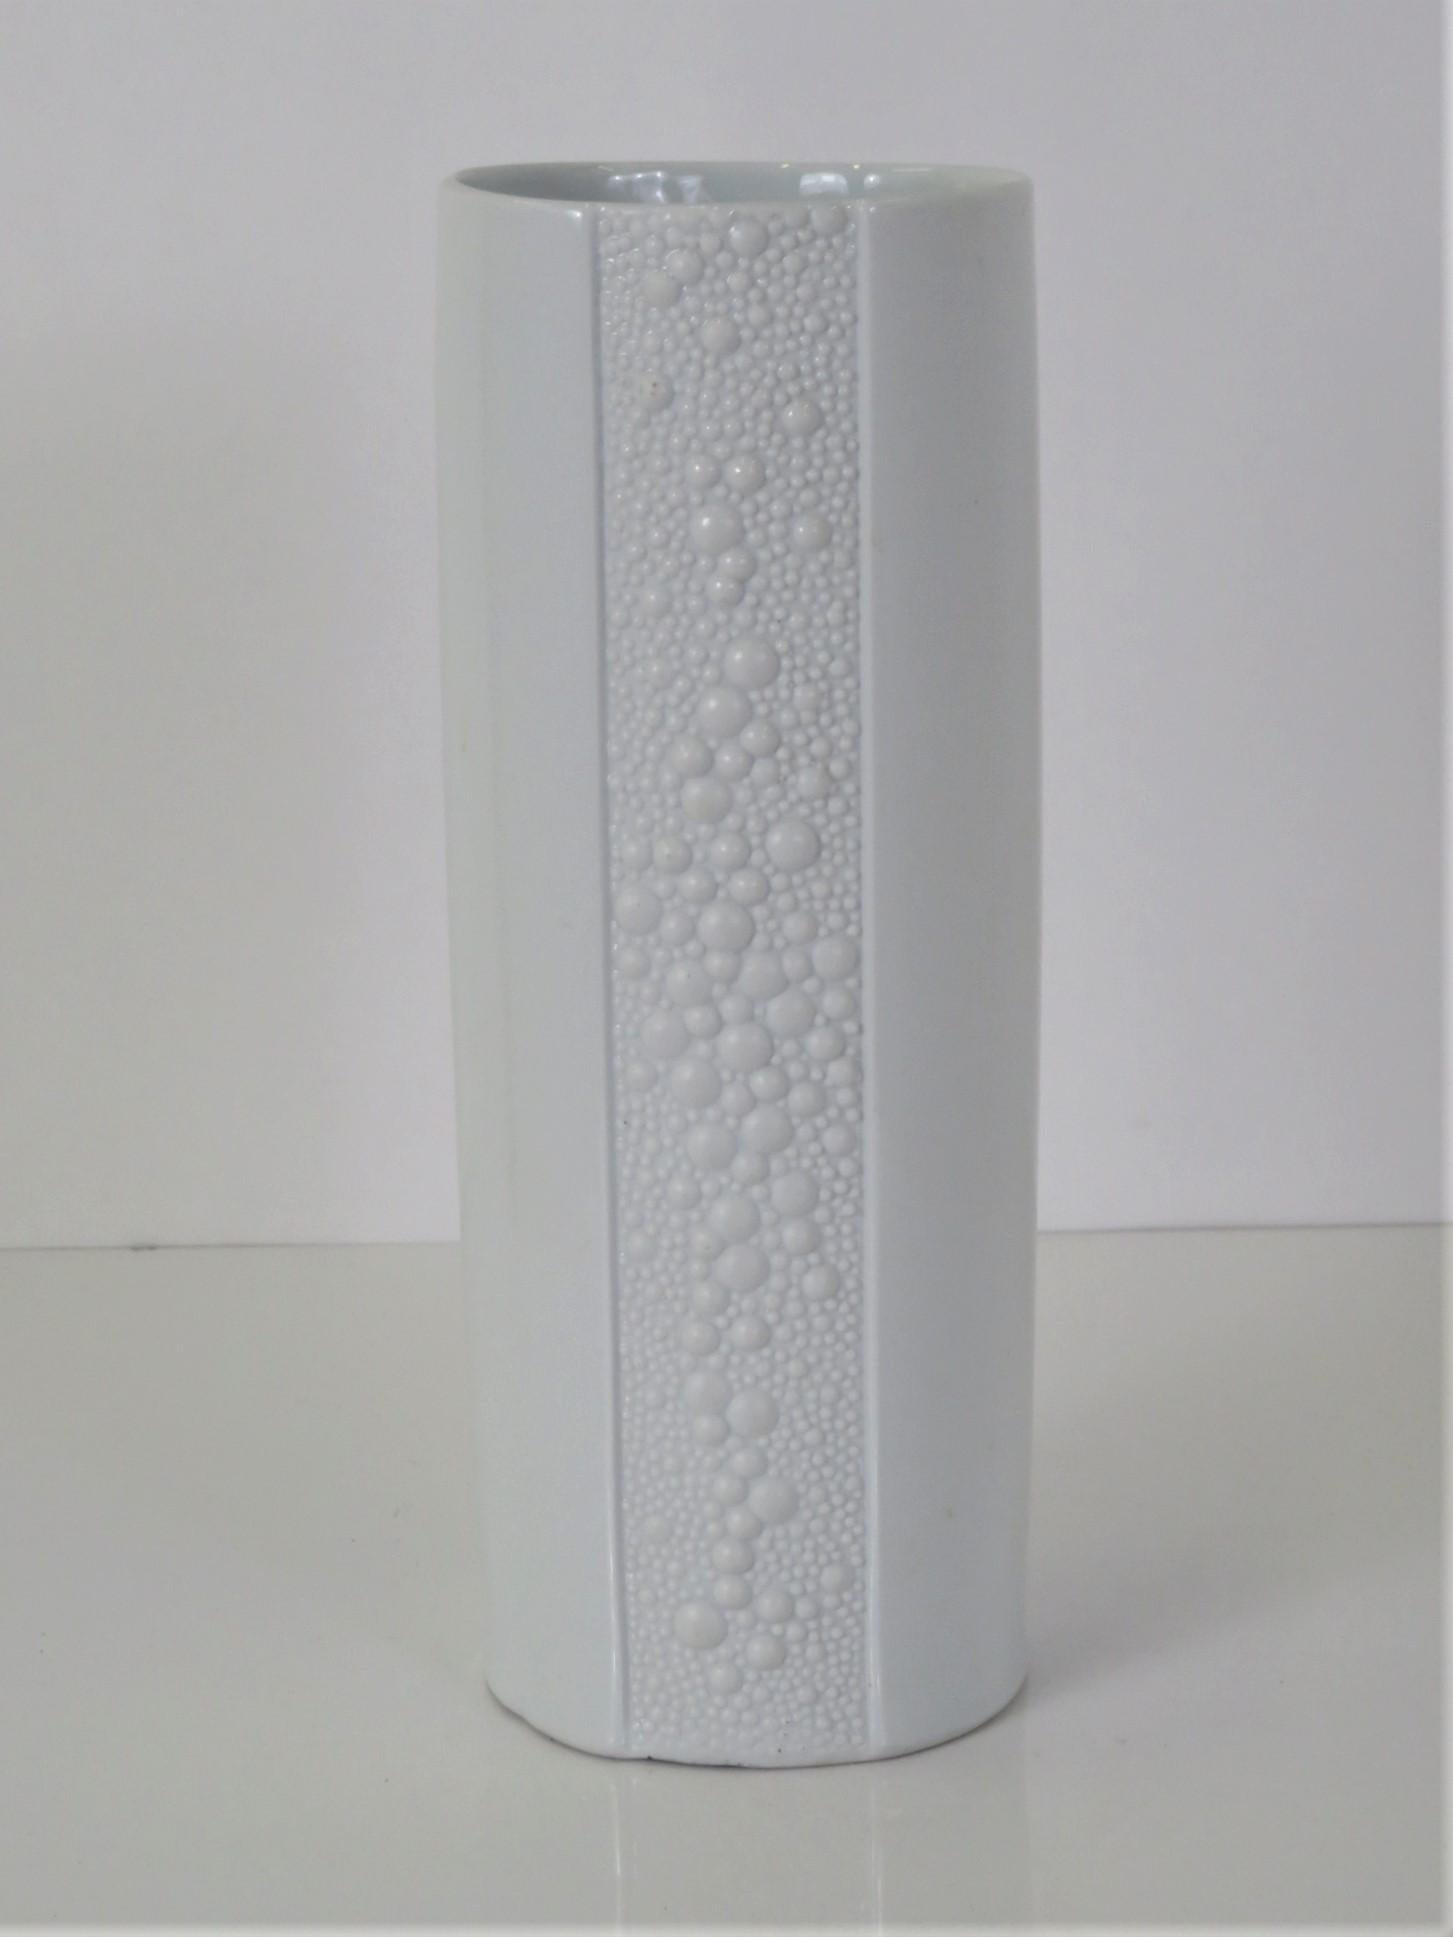 Combination of matte & glossy white glazing makes this modern and beautiful tall Vase much more interesting. The band of matte white in the center front and back has a raised decoration of bubbles reminiscent of the work of Tapio Wirkkala for